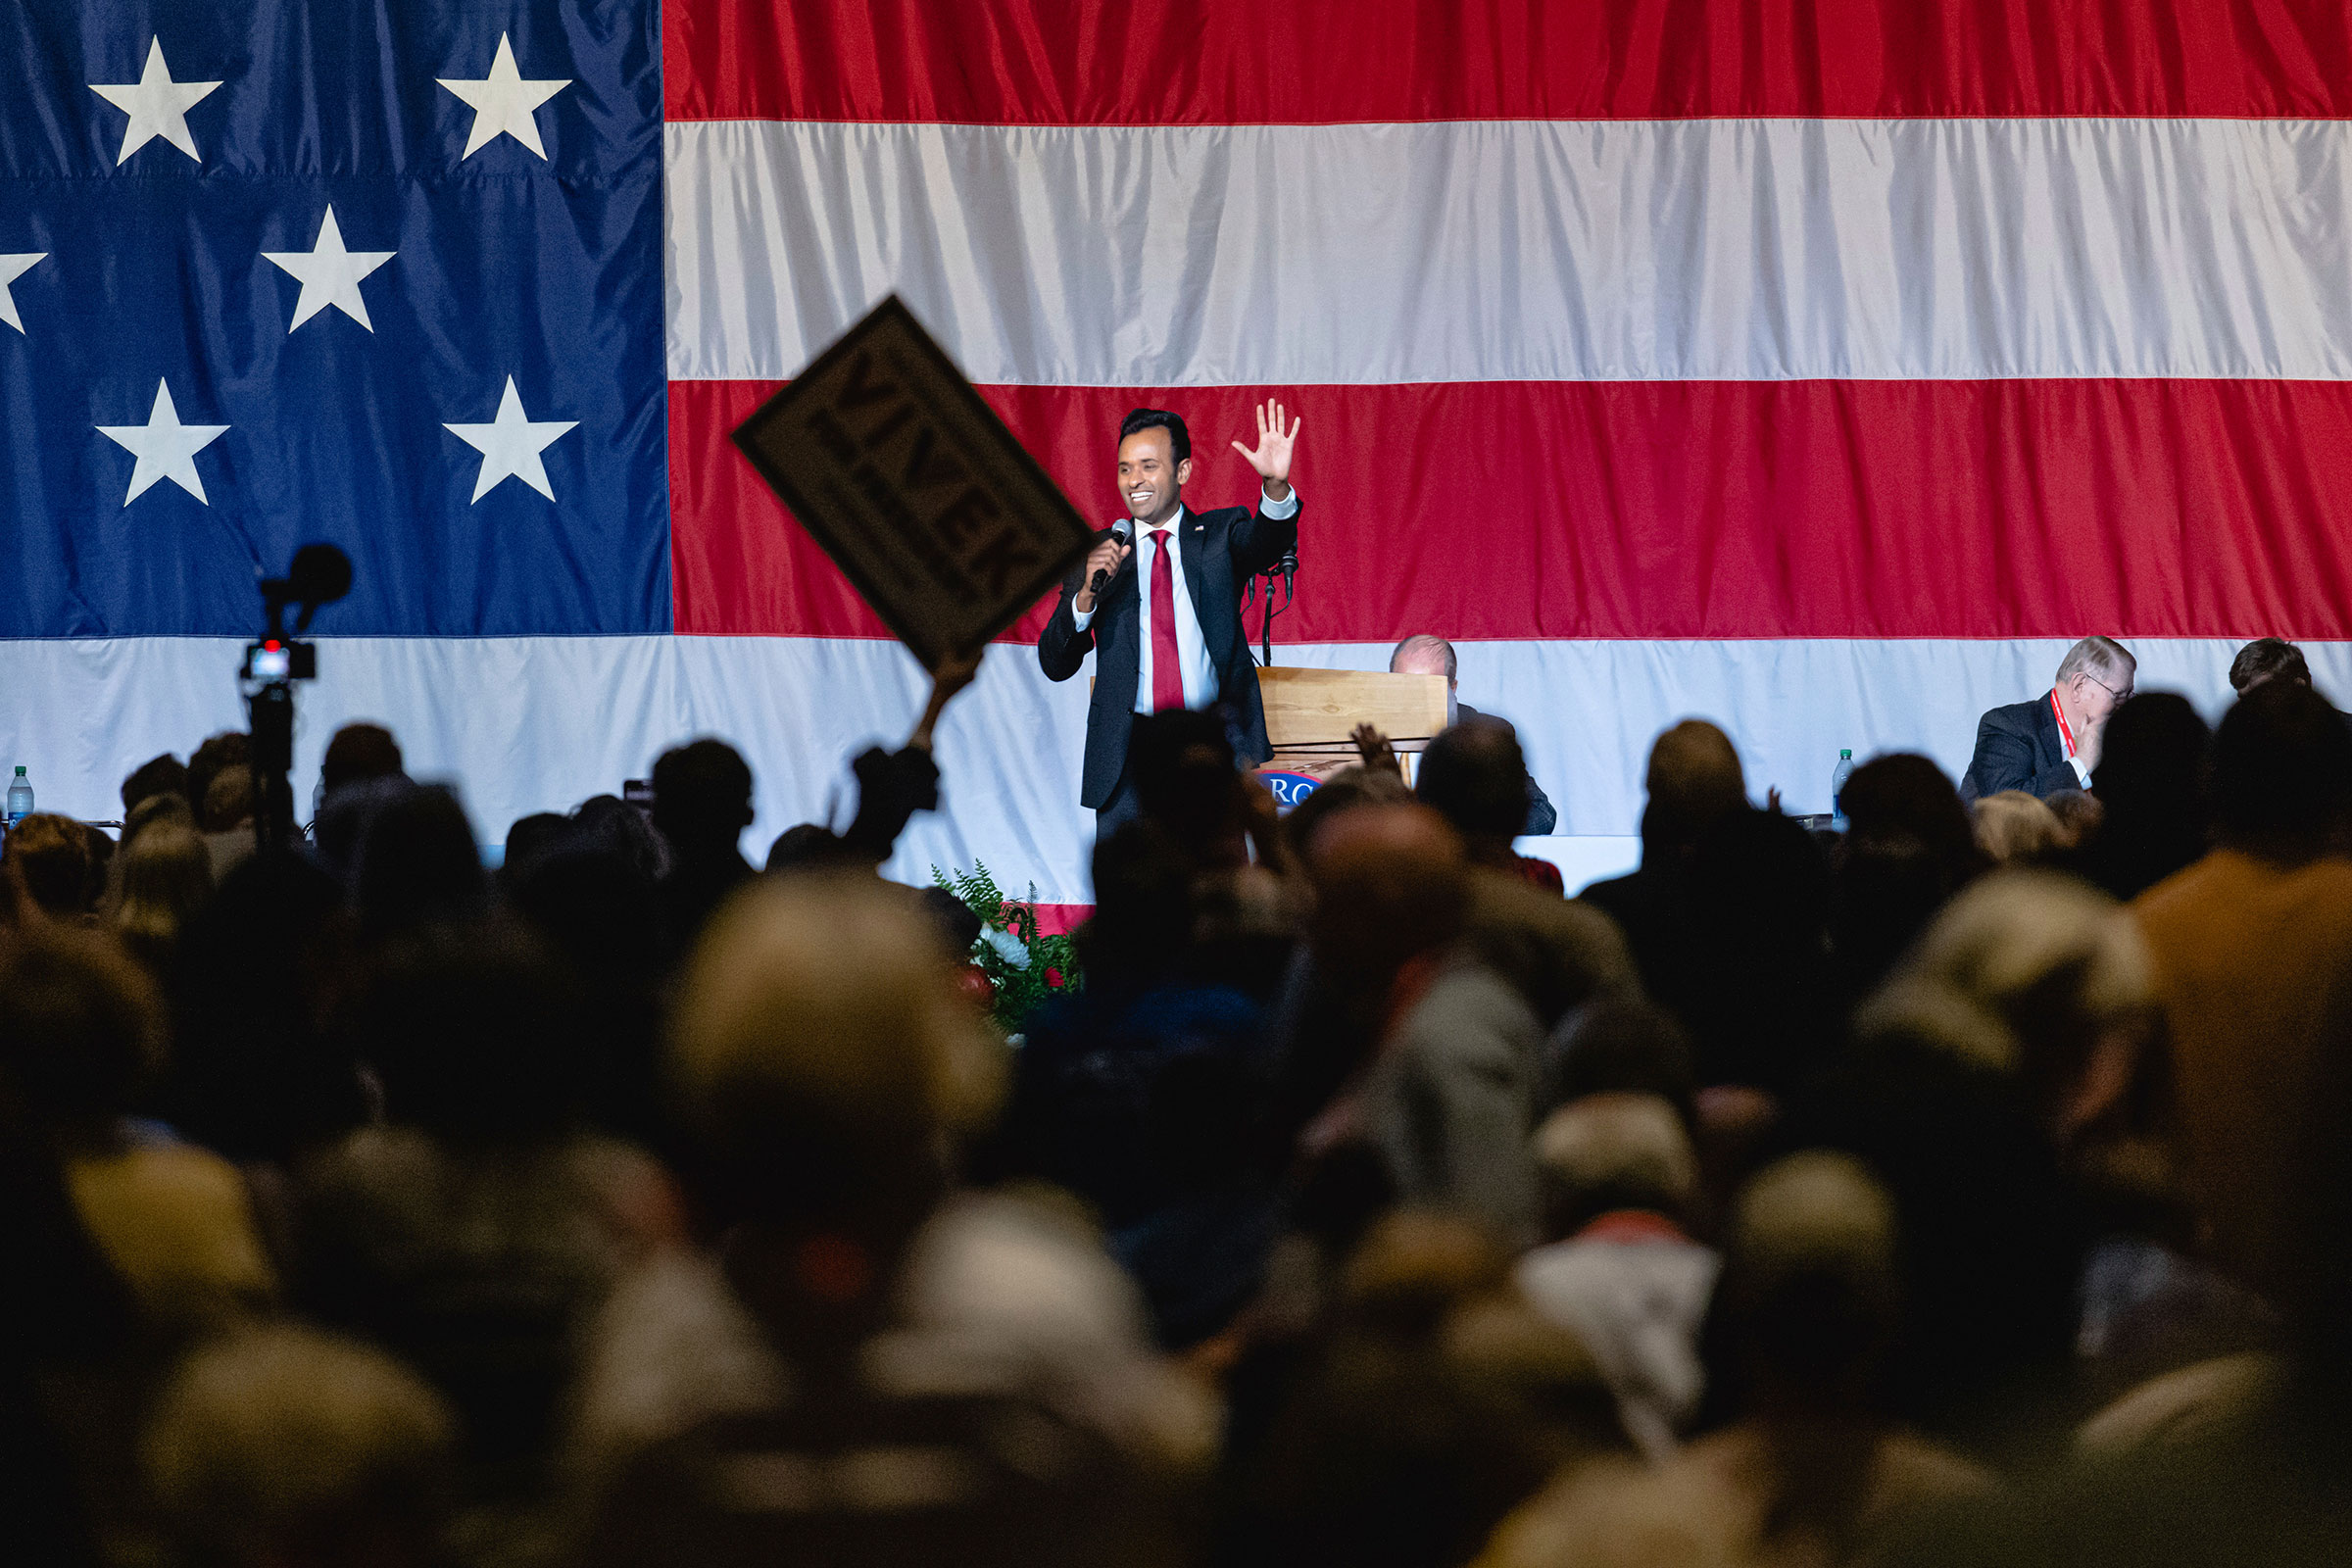 Vivek Ramaswamy, a Republican presidential candidate and businessman, waves toward the audience as he stands on a stage with the American flag behind him